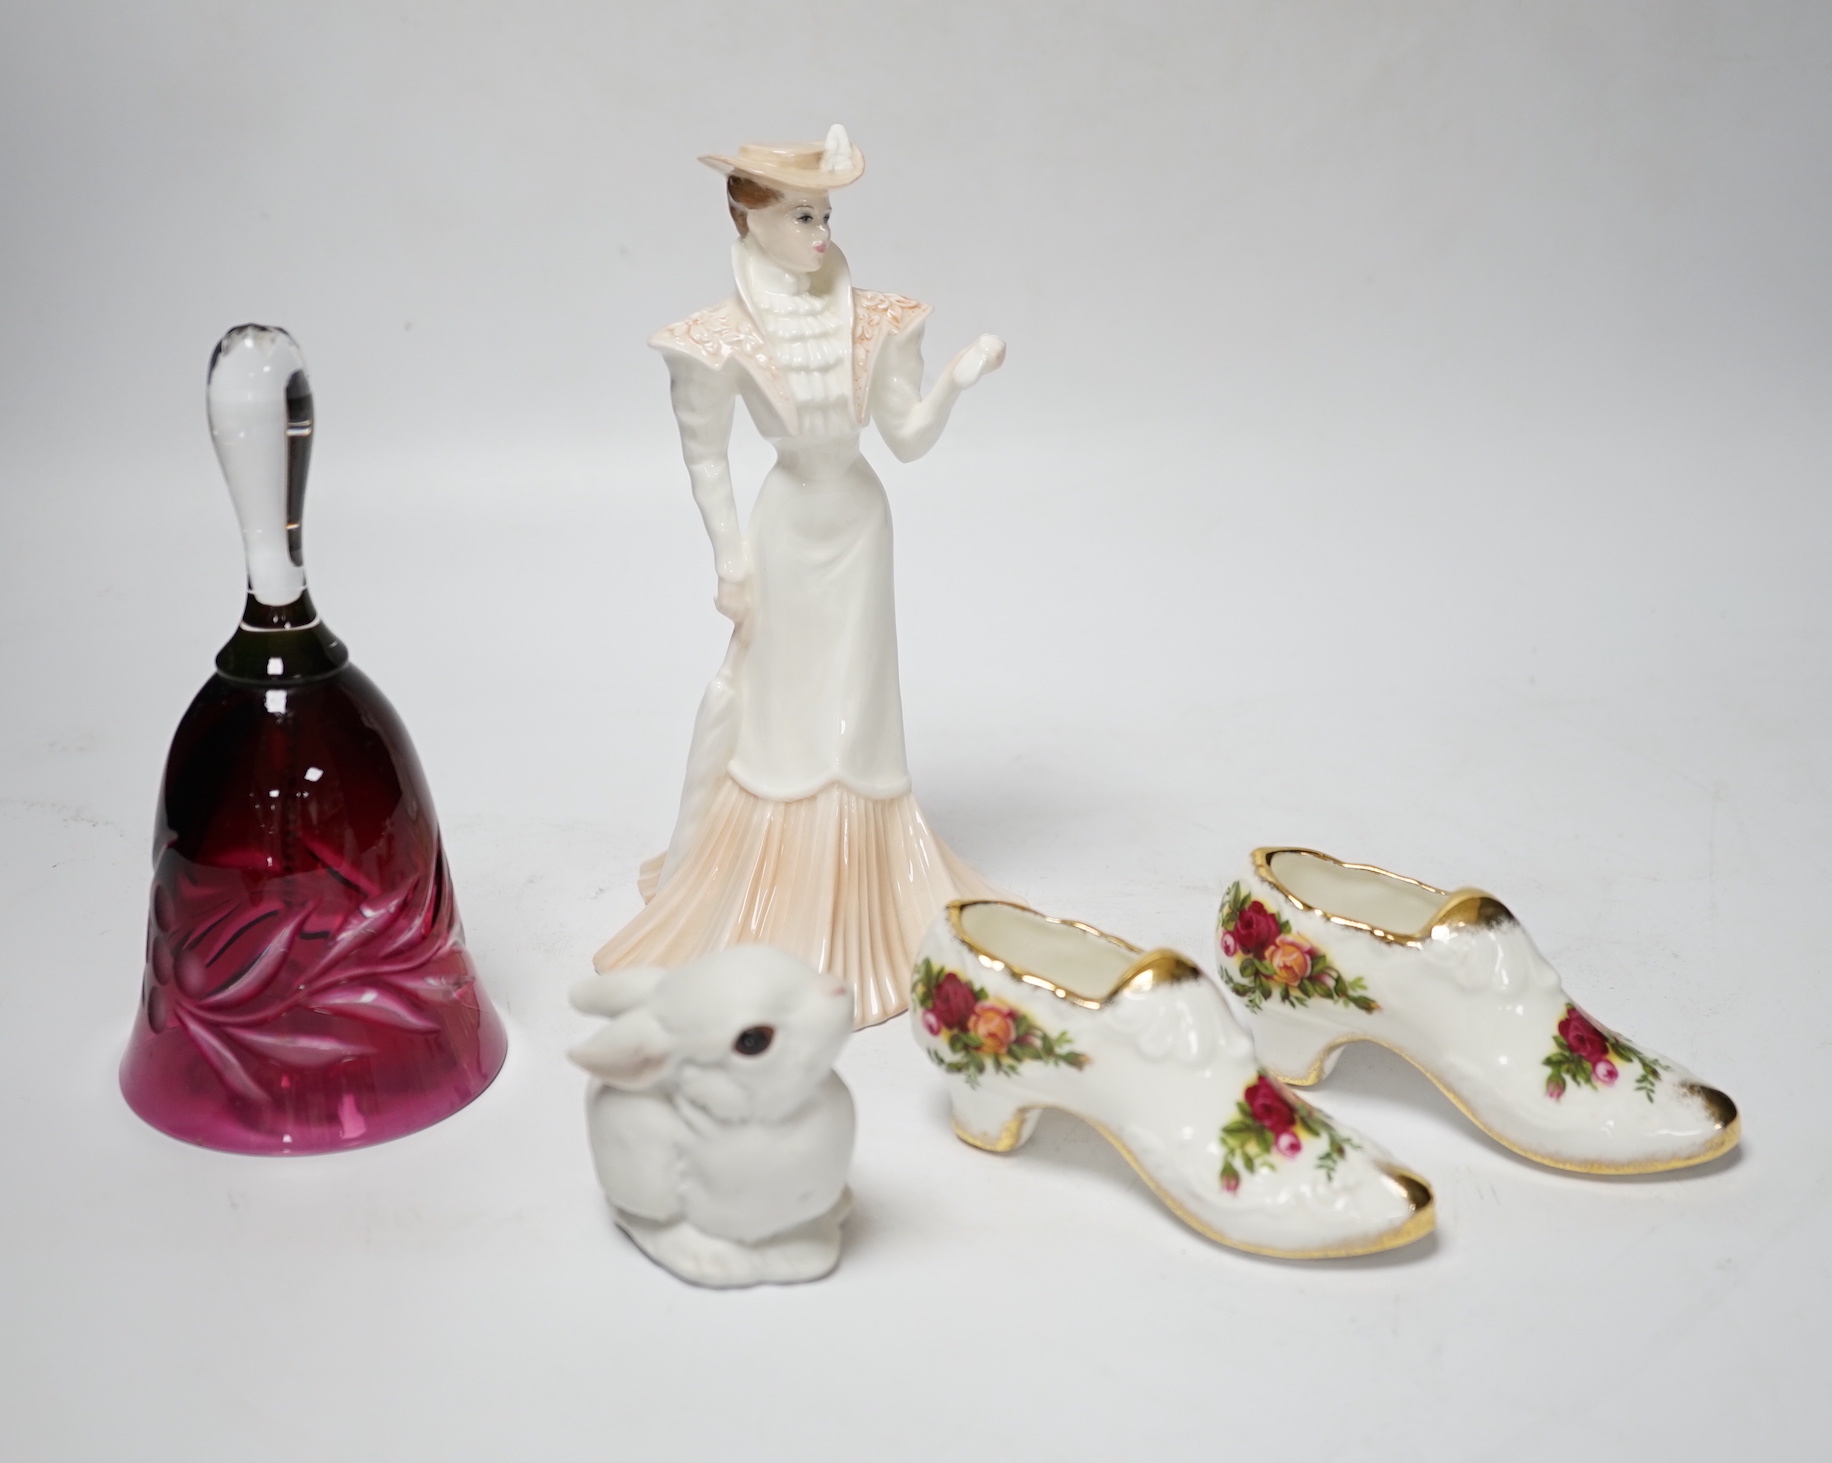 A small group of figurines and decorative ceramics, including four floral ceramic table displays